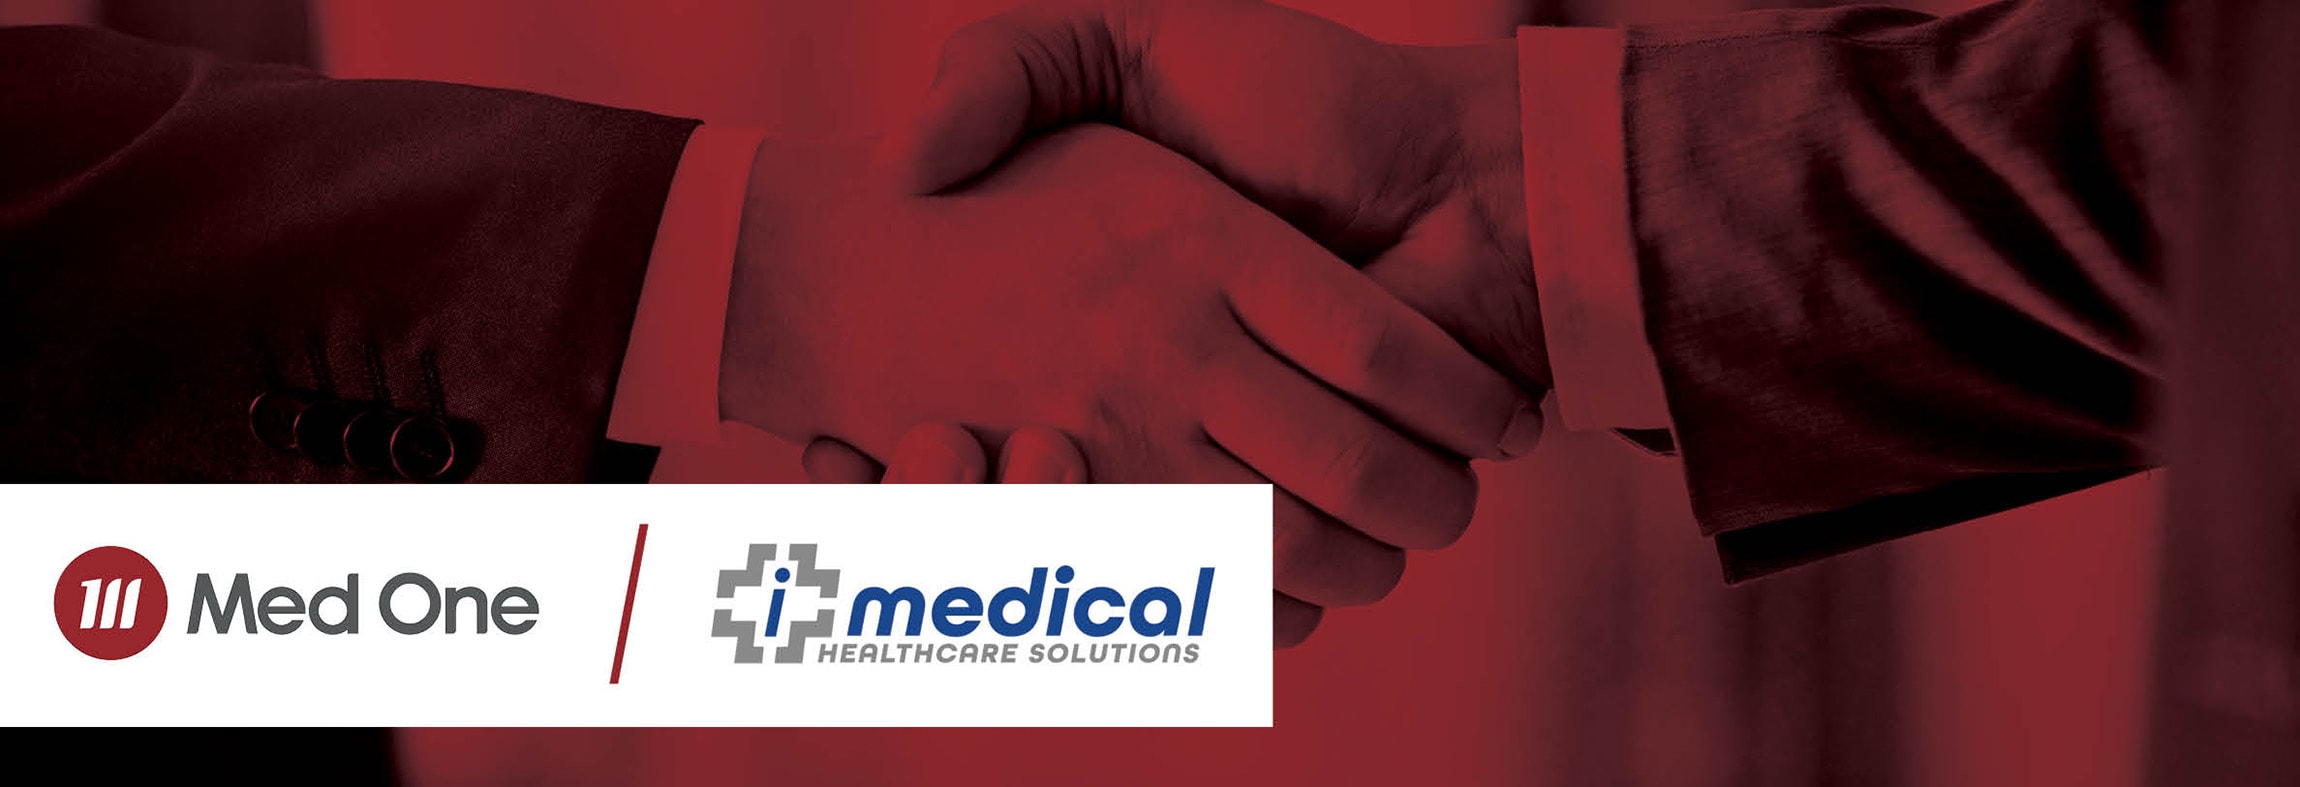 Med One Group and iMedical Healthcare Solutions Partner to Deliver Enhanced Medical Equipment Solutions